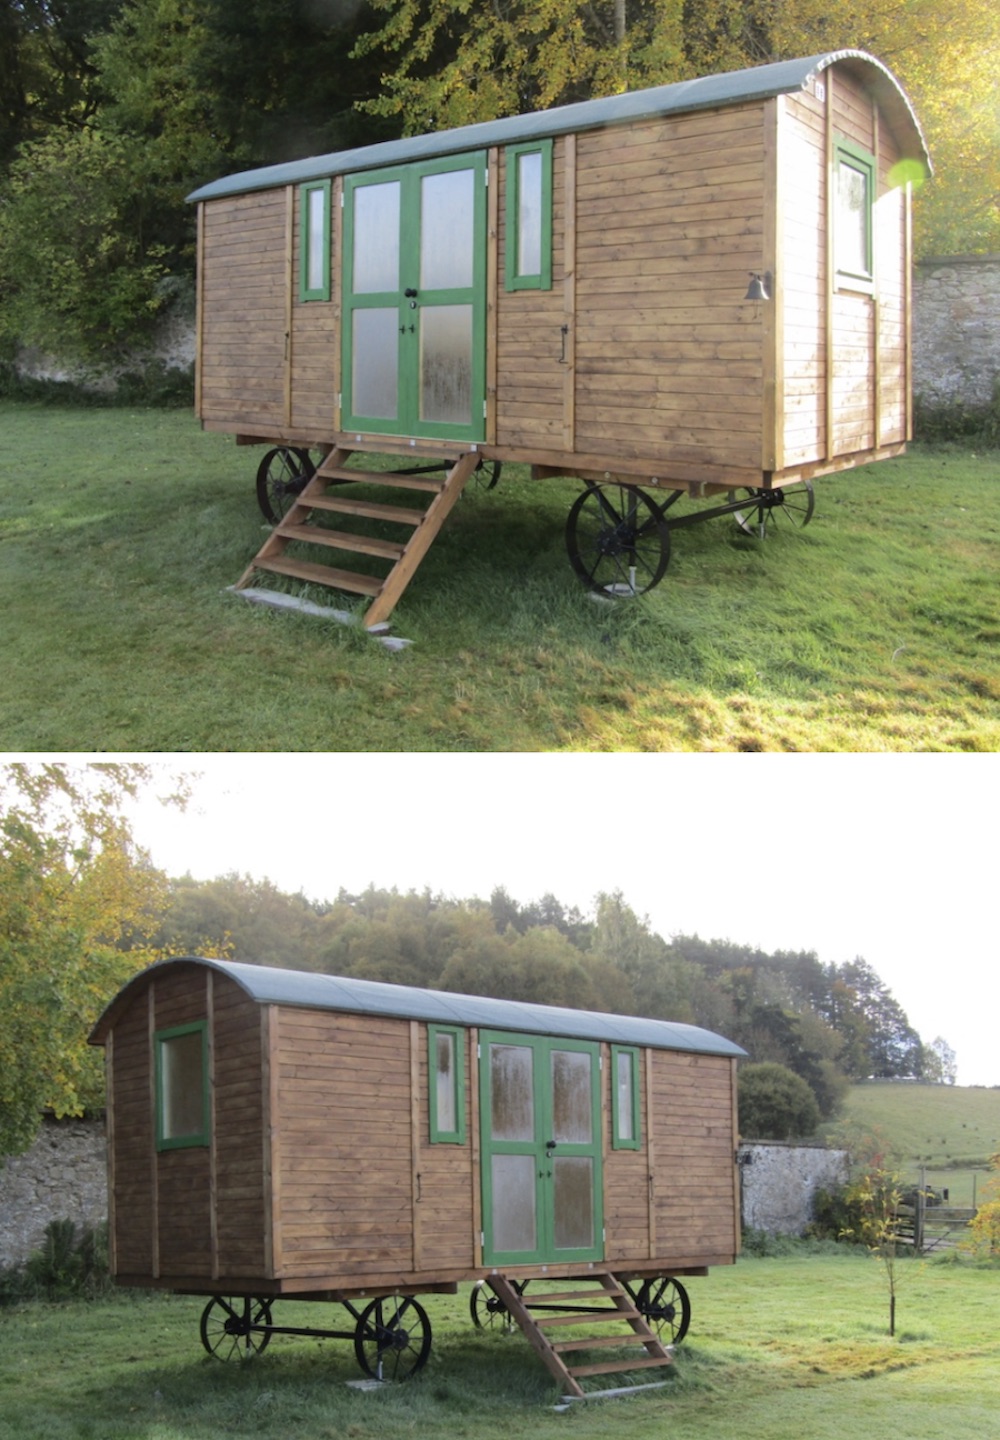 The completed Shepherds Hut Deluxe